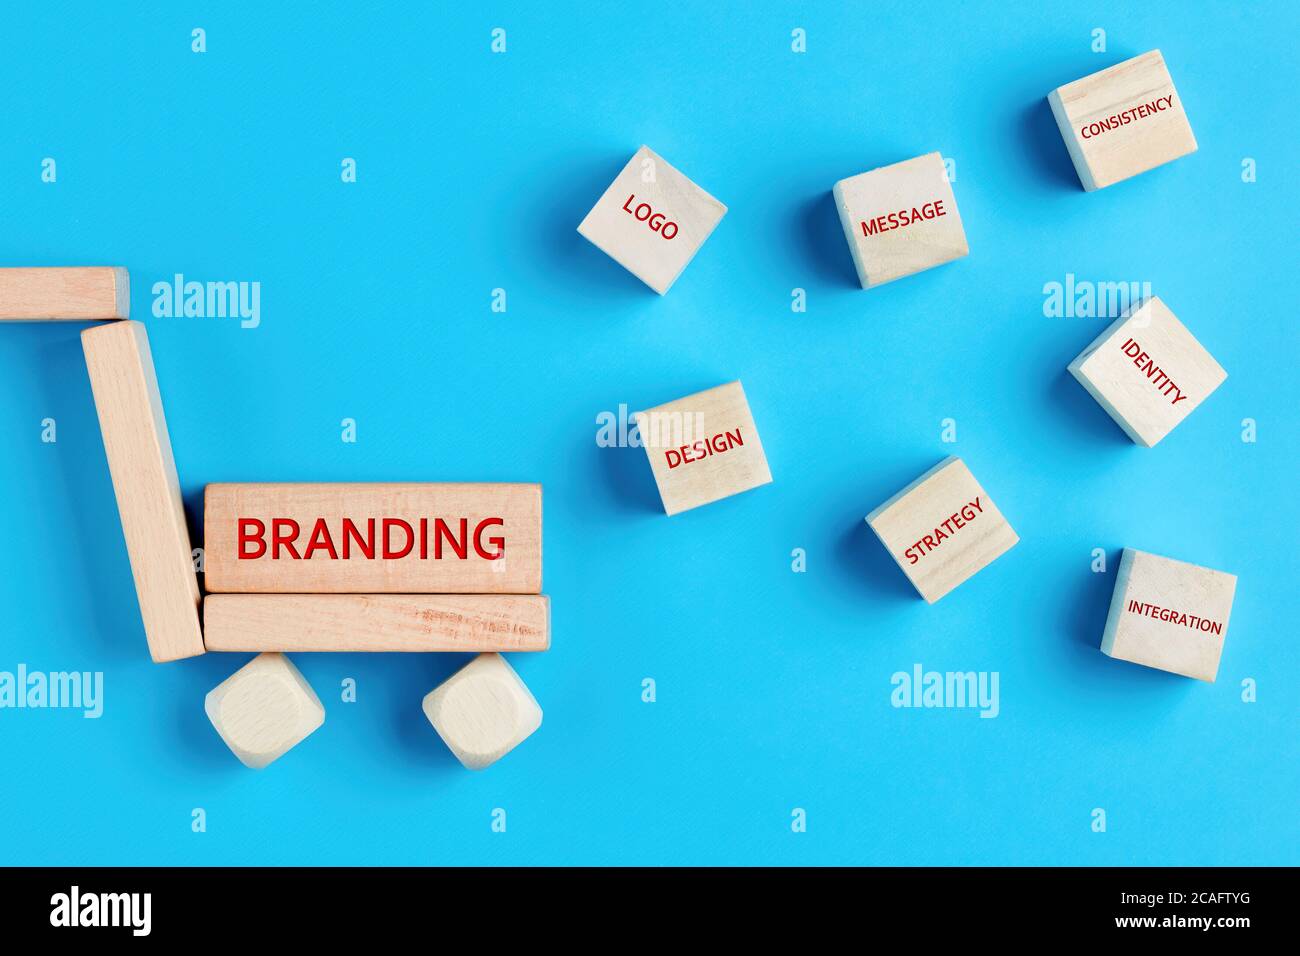 The concept of branding and its essential elements written on wooden blocks on blue background. Concept of product or service branding in business. Stock Photo